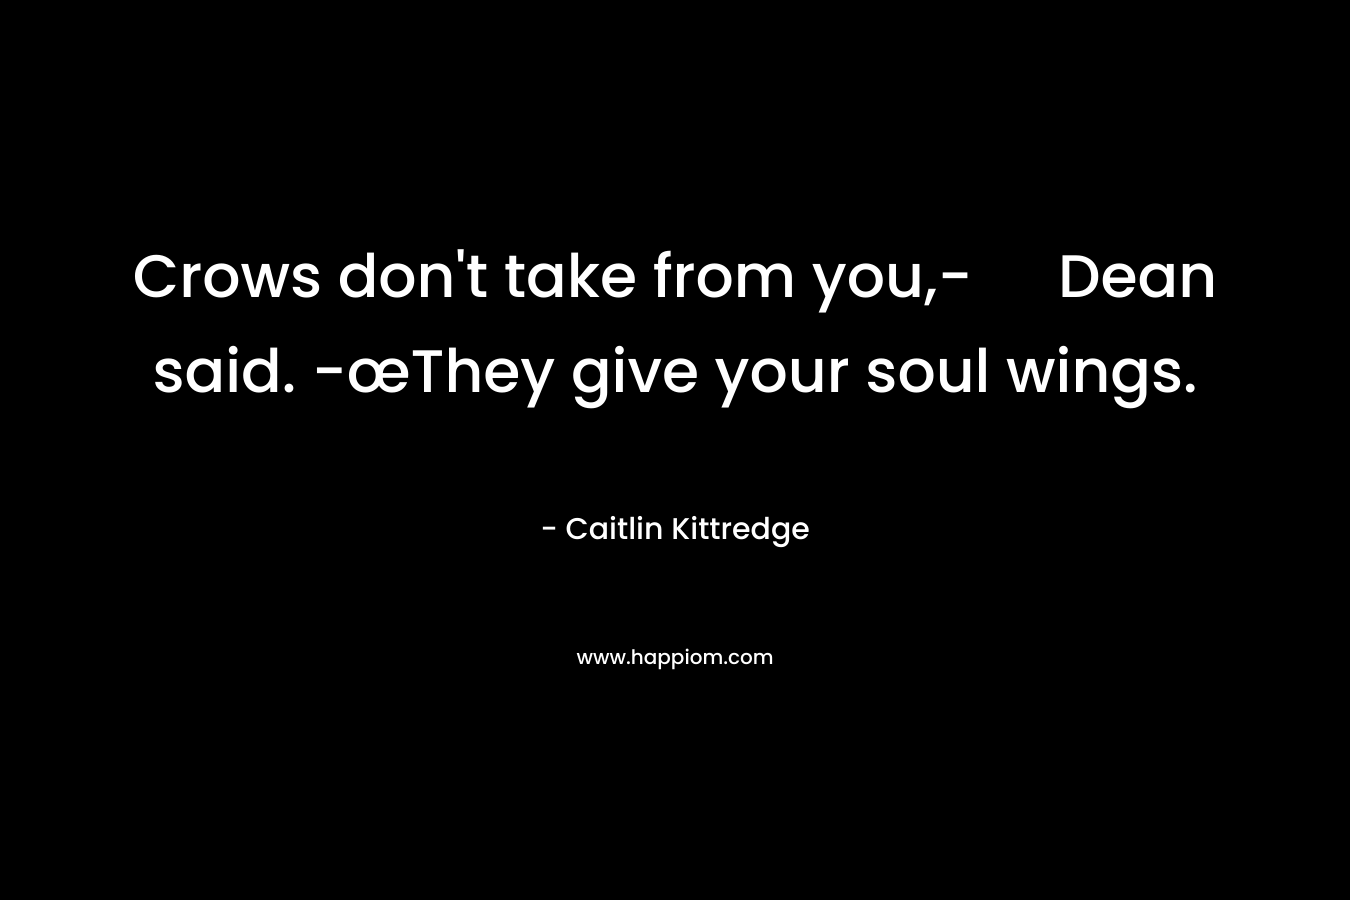 Crows don’t take from you,- Dean said. -œThey give your soul wings. – Caitlin Kittredge